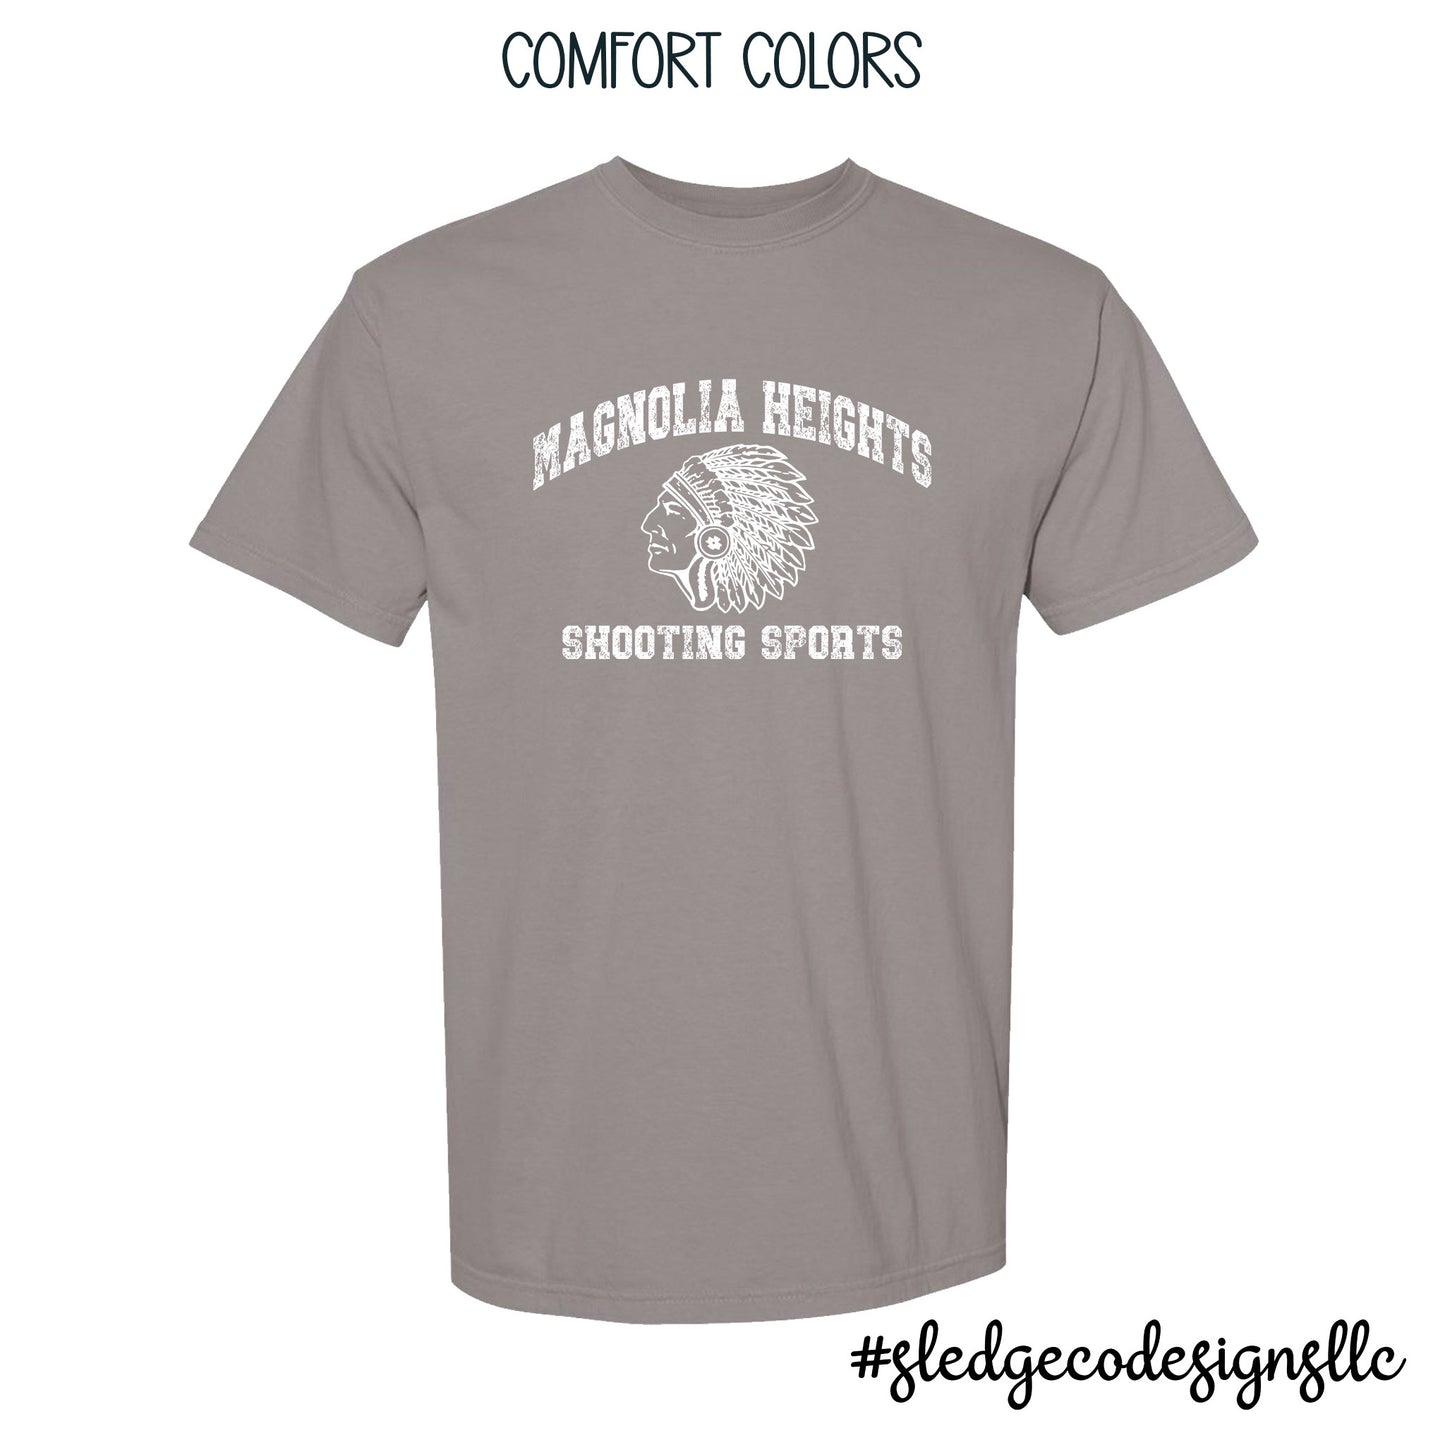 MAGNOLIA HEIGHTS SHOOTING SPORTS | COMFORT COLORS | GREY